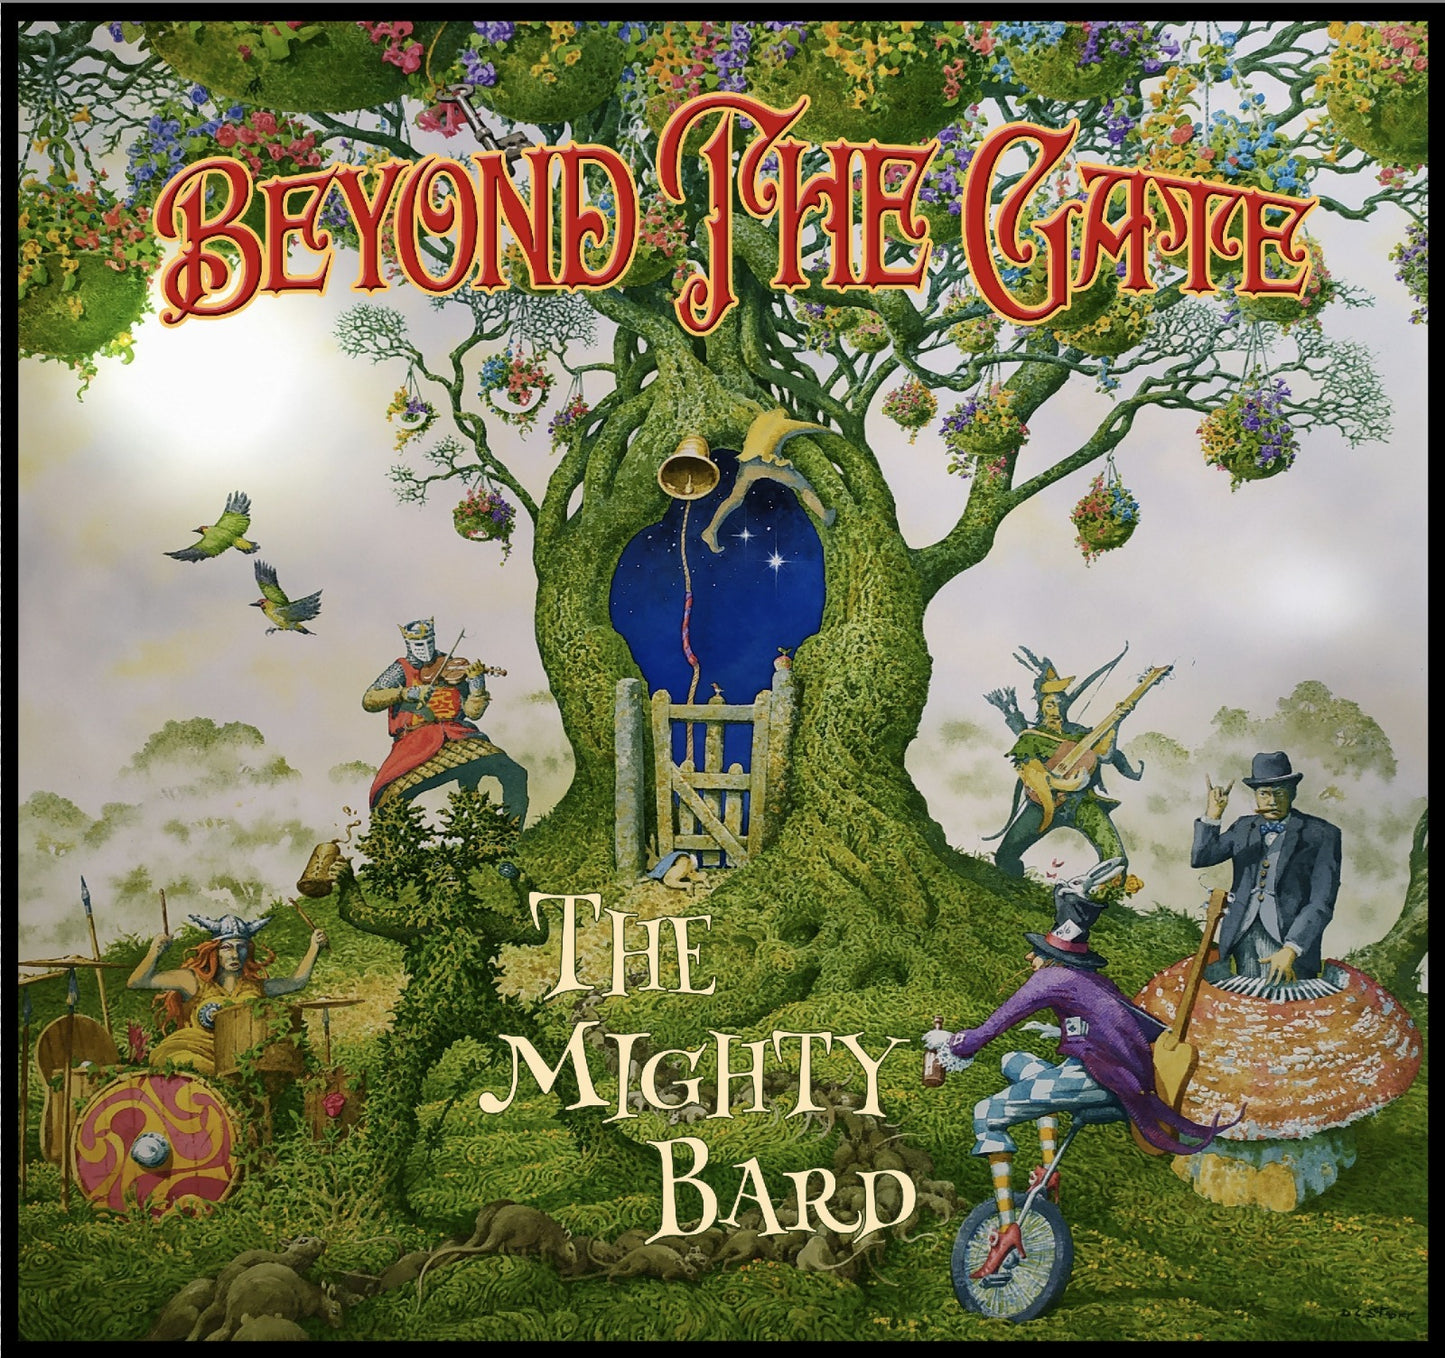 SPECIAL EDITION VINYL OF BEYOND THE GATE ALBUM - PRE-ORDER